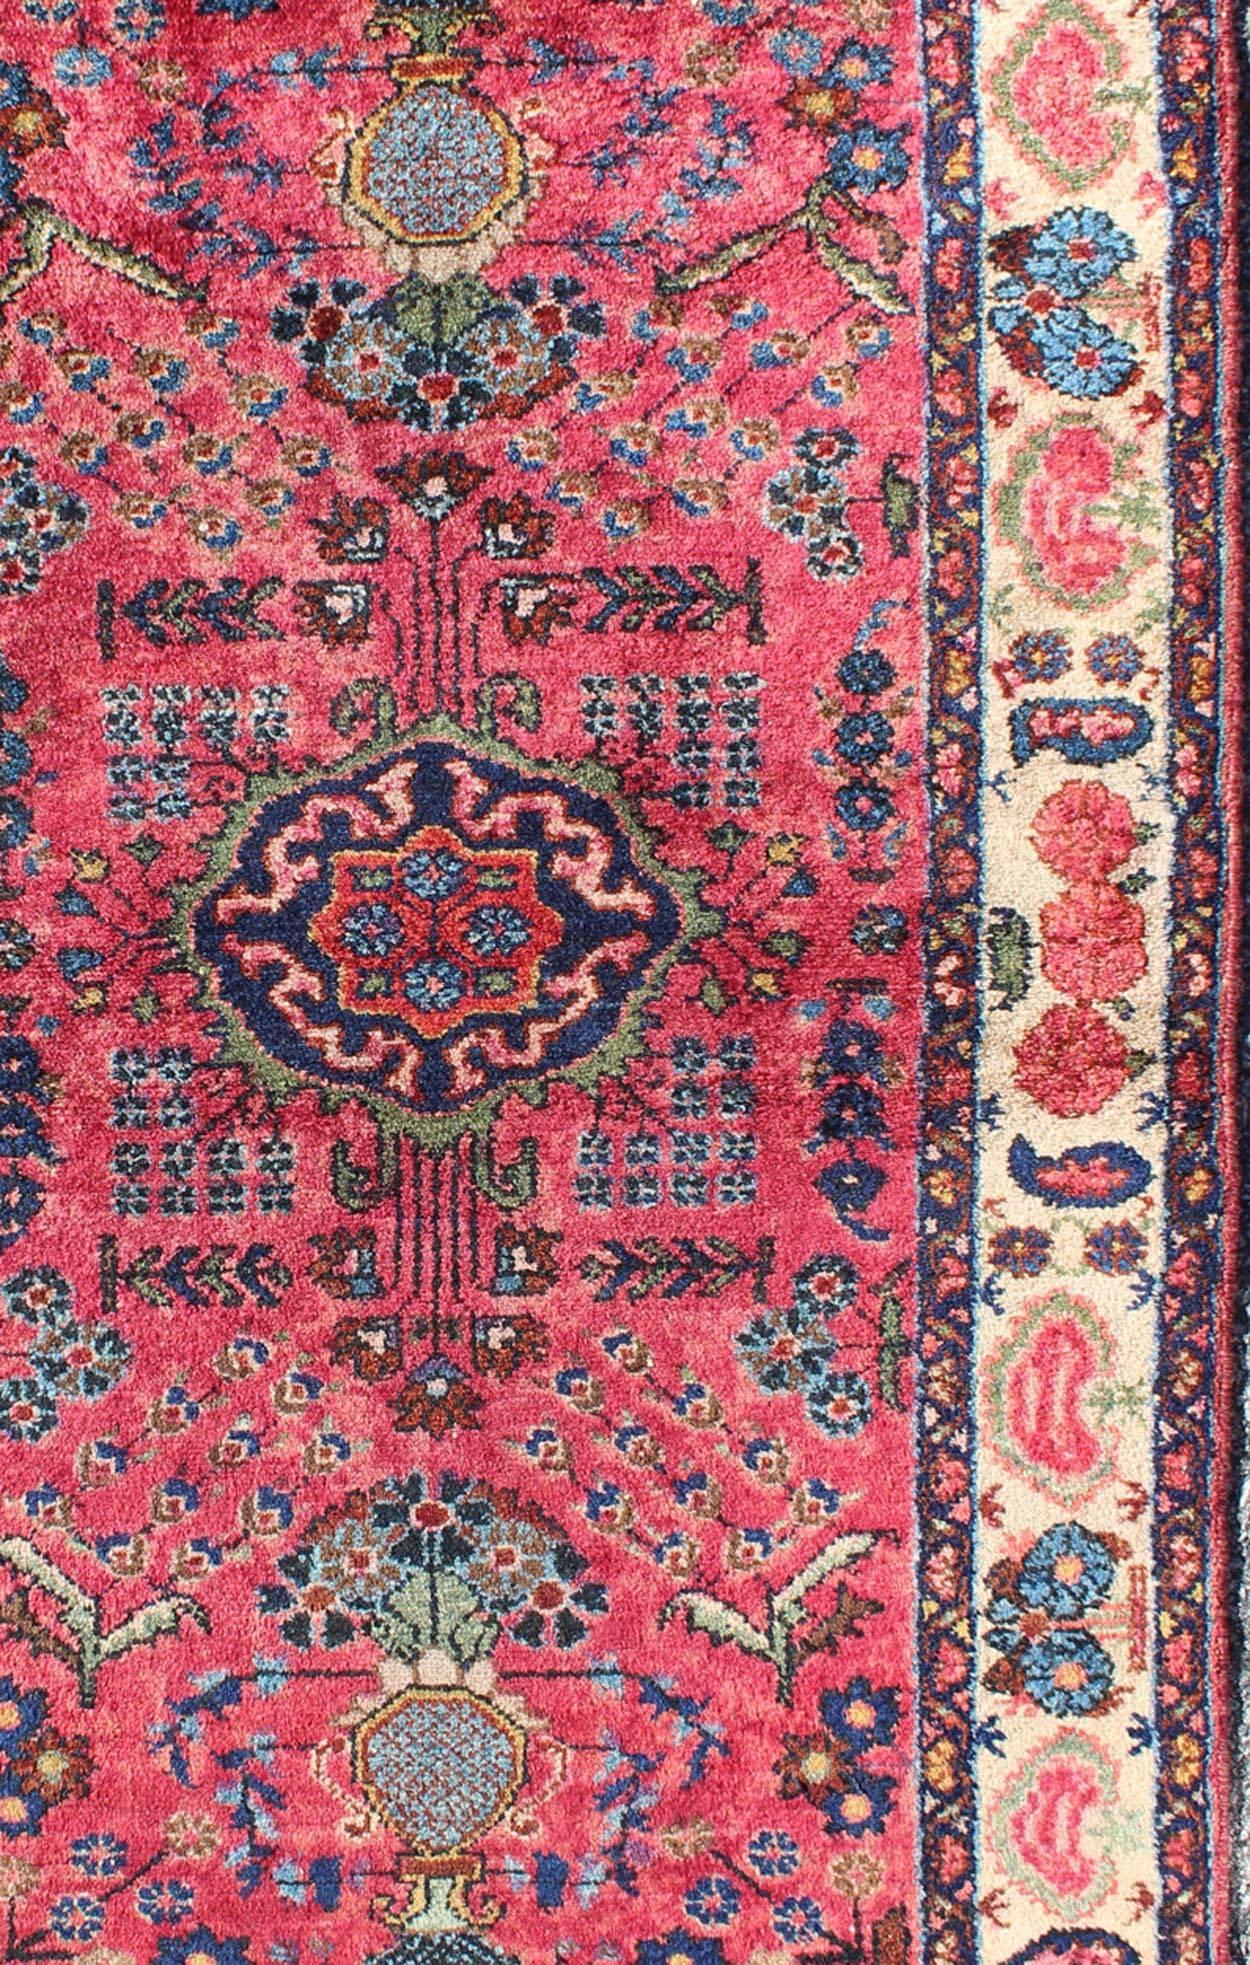 Hand-Knotted Antique Persian Lilihan Rug with Large-Scale Floral Design